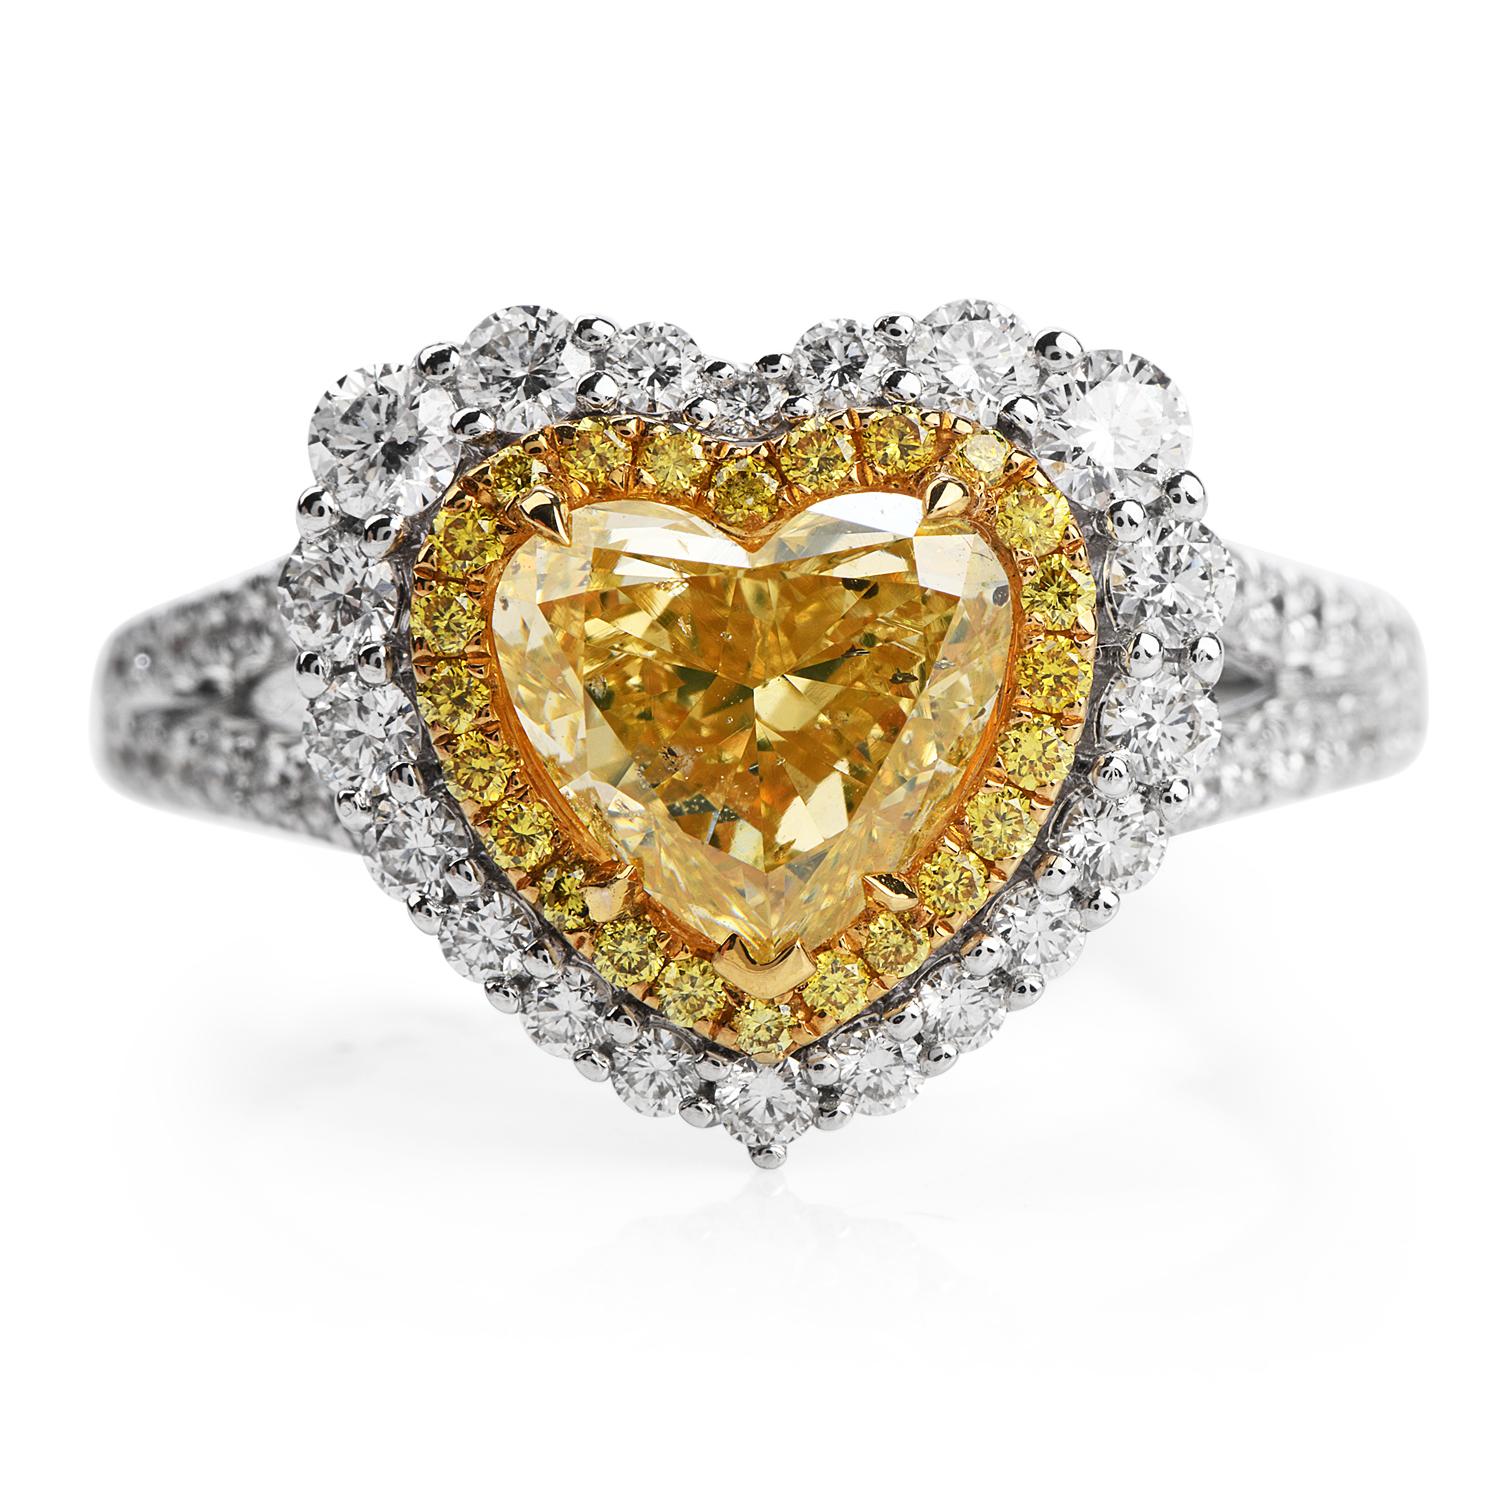 Love is in the Air!

What better way of showing what is in your heart, but with a Lovely heart Engagement Ring?

Enjoy a lifetime of wear this GIA Certified Heart Shape Cut Fancy Natural Color Diamond of 2.16ct, SI1-SI2 Clarity,

Crafted in